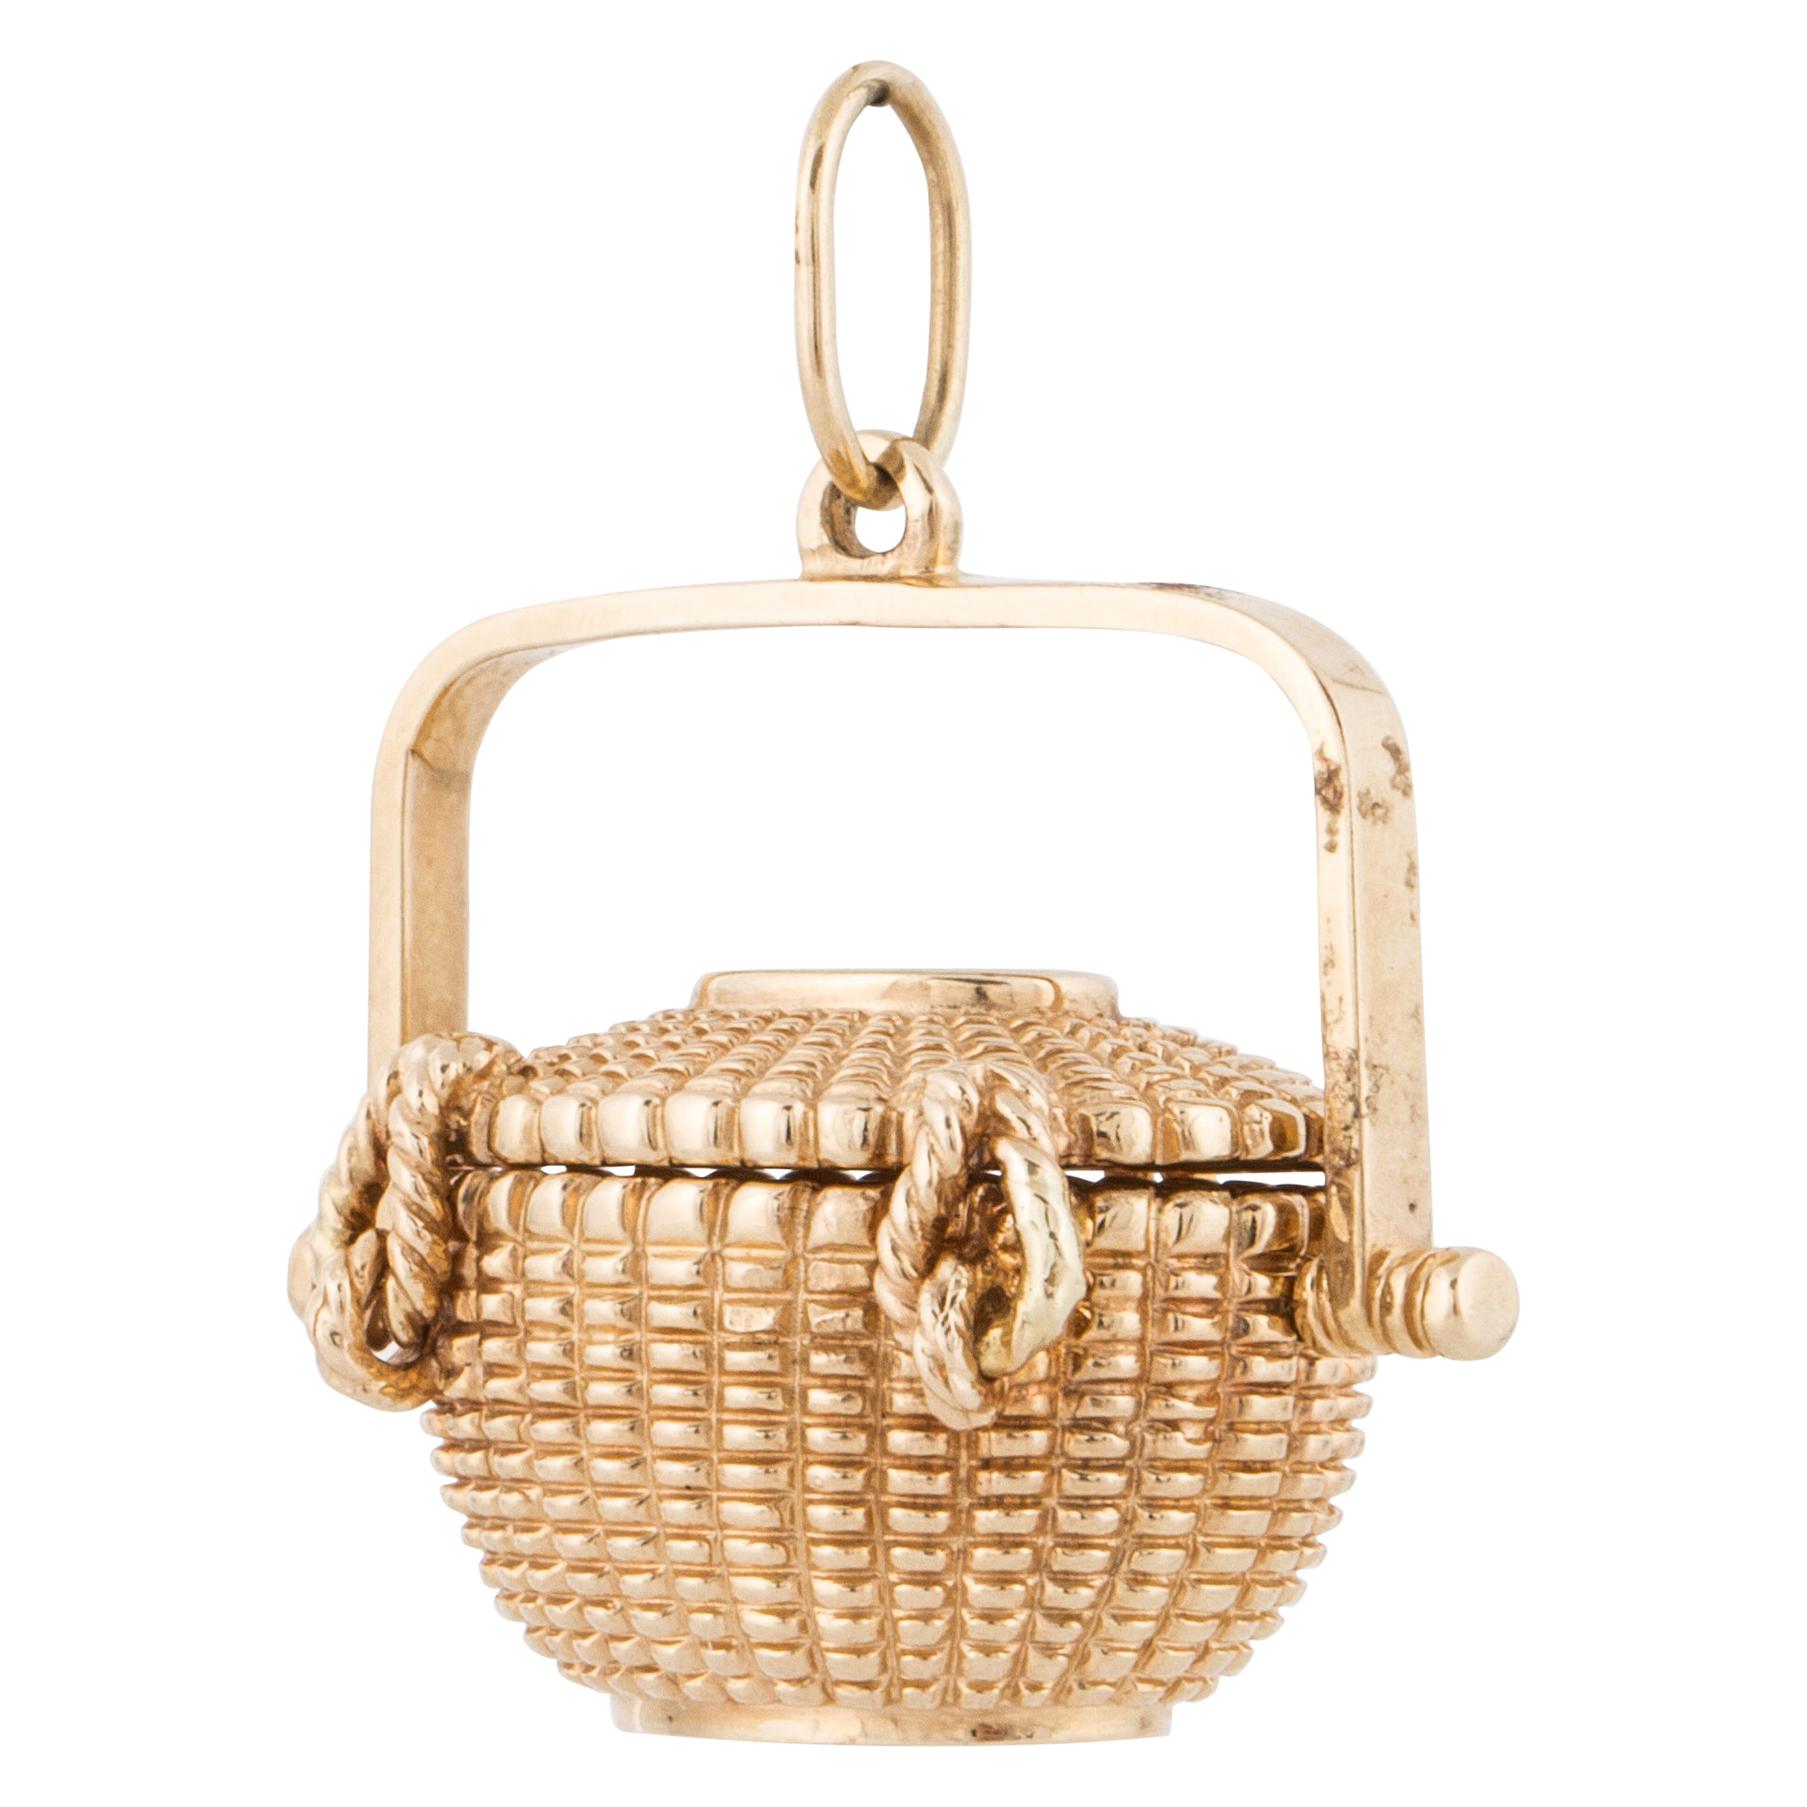 Jewels By Lux 14K Rhodium Plated White and Yellow Two Tone Gold with Nantucket Basket 2D and Pendant